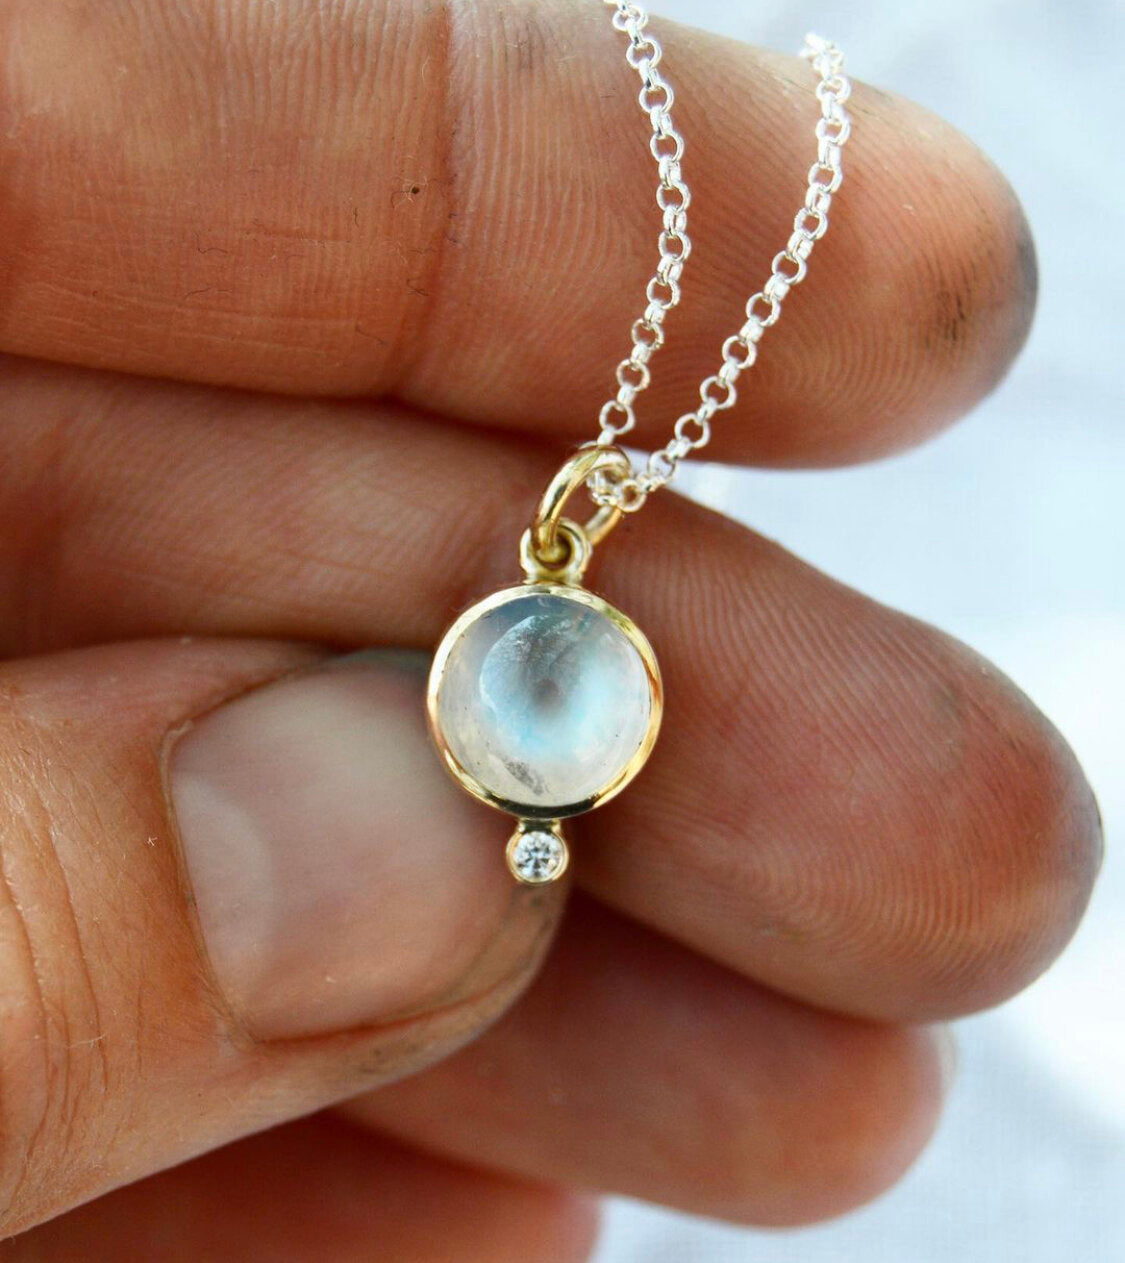 Made by hand in Northern New Mexico using recycled metals and responsibly sourced stones, this timeless, heirloom piece is sure to make a statement.    Polished moonstone sits next to a white diamond, held 14kt yellow gold with an 18" sterling silver rolo chain.